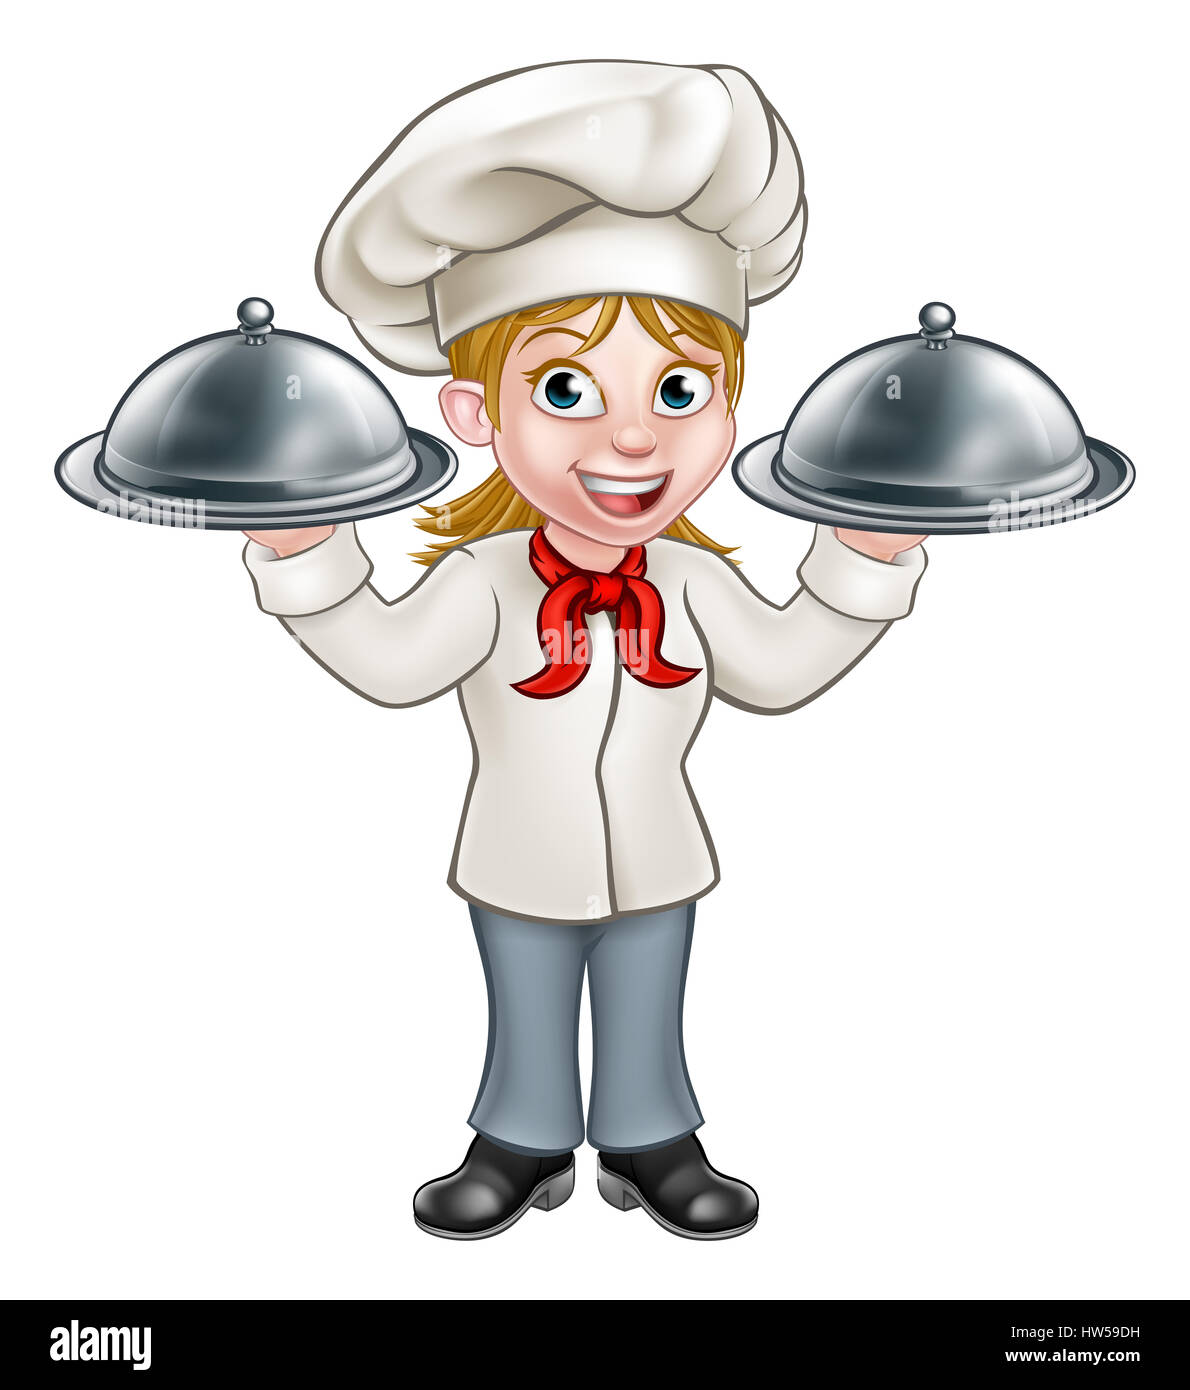 Cartoon woman chef or baker holding a silver cloche food meal plate platter tray Stock Photo